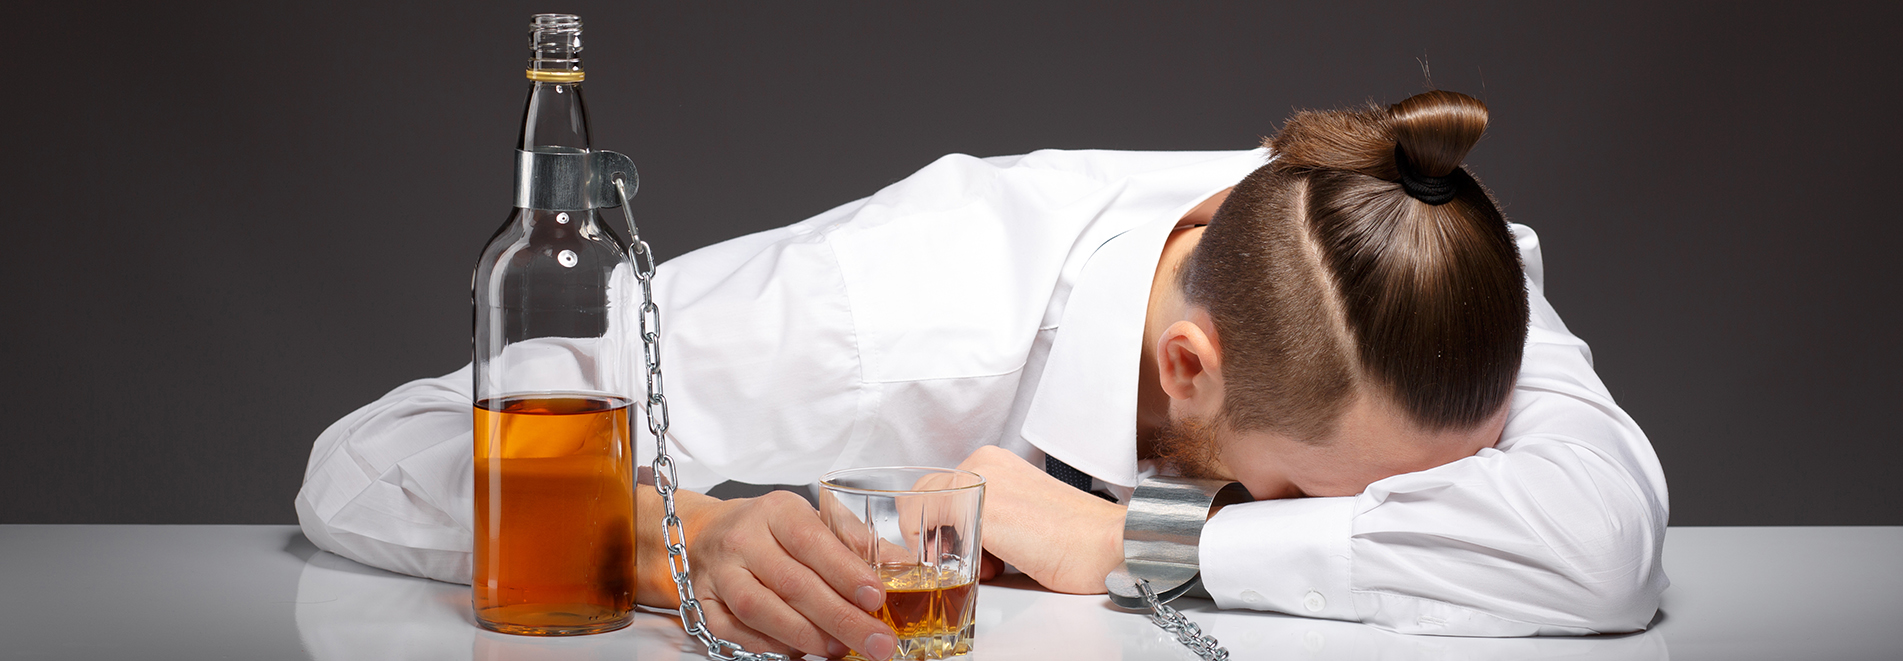 Alcohol Addiction Treatment Surprise, AZ - A mans sits with his head down on a table. His left hand is chained to a bottle of alcohol that sits next to him with a glass of alcohol is in his right hand.